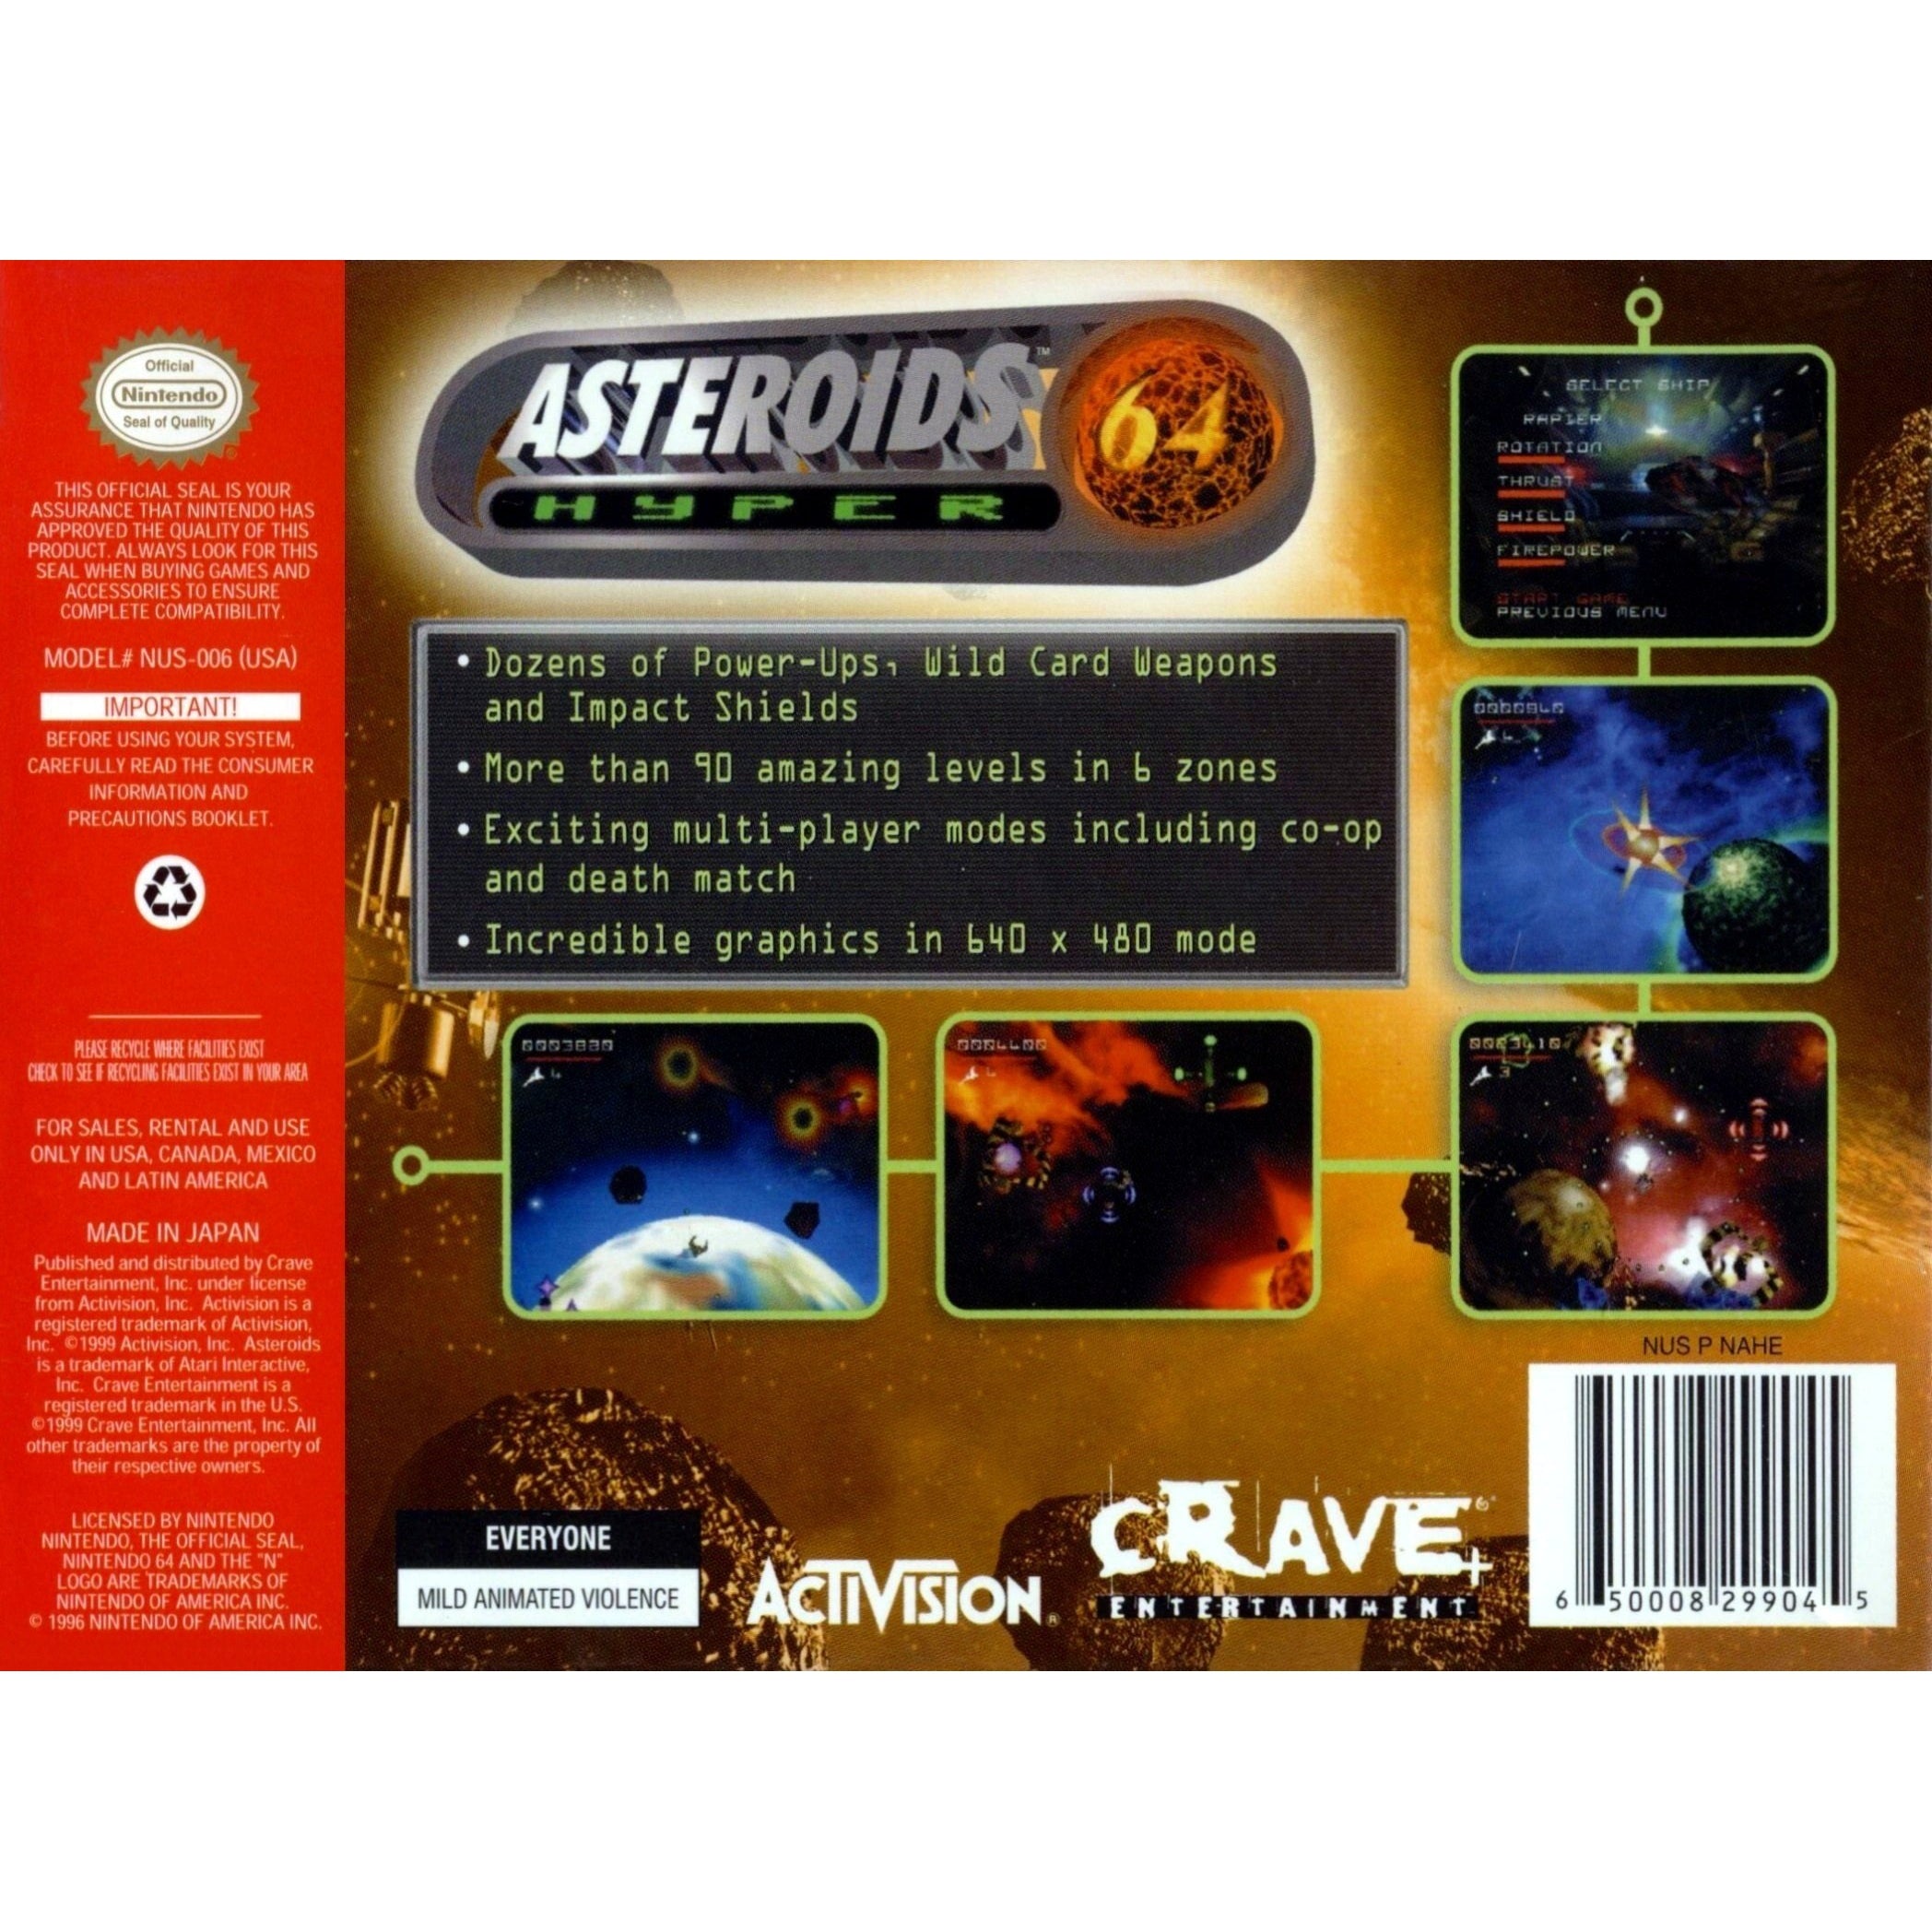 Your Gaming Shop - Asteroids Hyper 64 - Authentic Nintendo 64 (N64) Game Cartridge